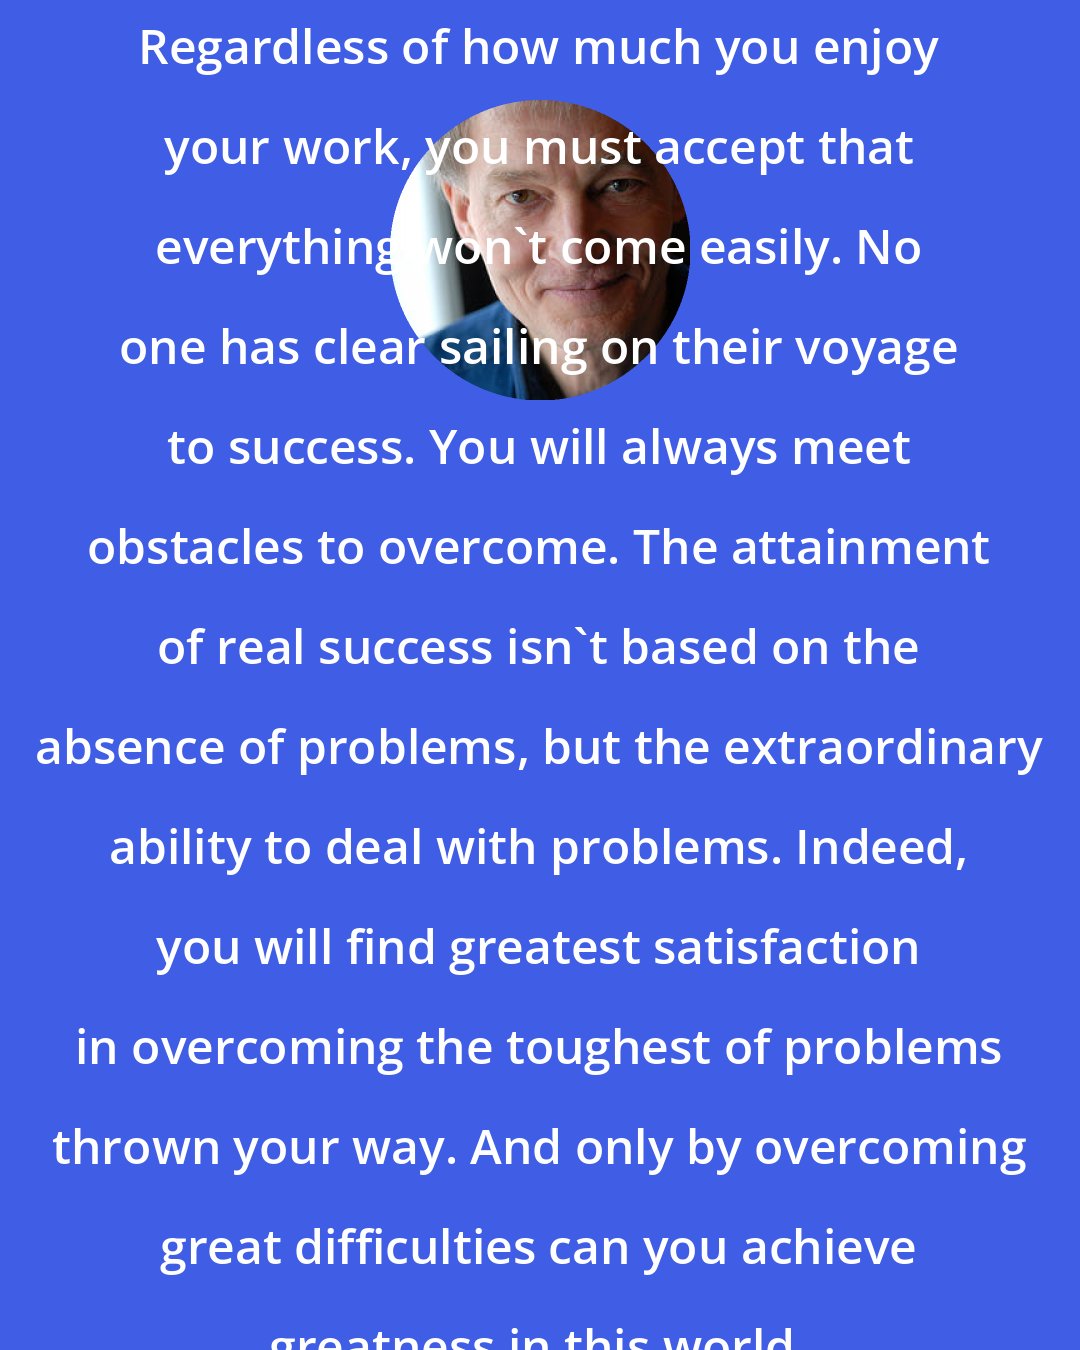 Ernie J Zelinski: Regardless of how much you enjoy your work, you must accept that everything won't come easily. No one has clear sailing on their voyage to success. You will always meet obstacles to overcome. The attainment of real success isn't based on the absence of problems, but the extraordinary ability to deal with problems. Indeed, you will find greatest satisfaction in overcoming the toughest of problems thrown your way. And only by overcoming great difficulties can you achieve greatness in this world.